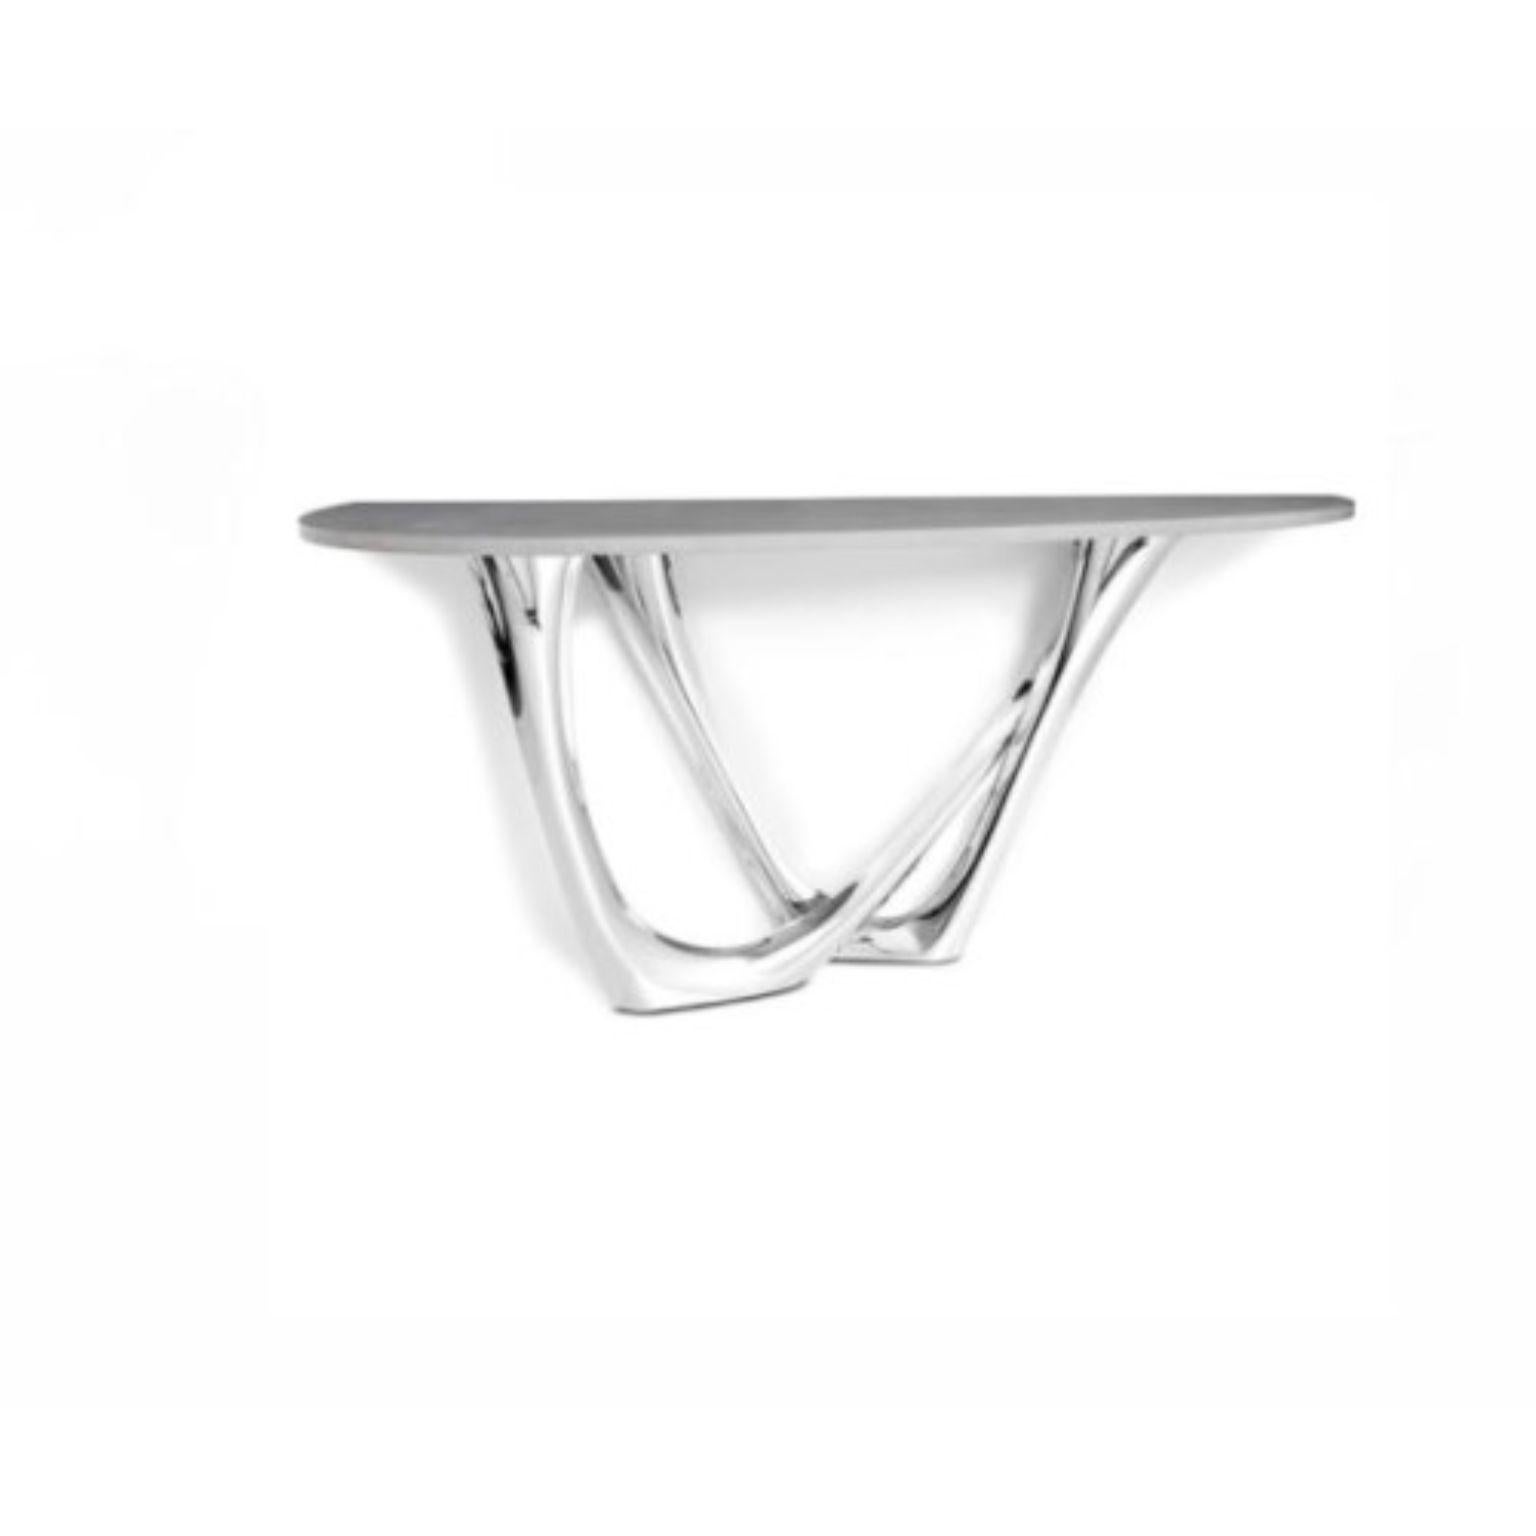 Polish Concrete Grey G-Console Duo Concrete Top and Steel Base by Zieta For Sale